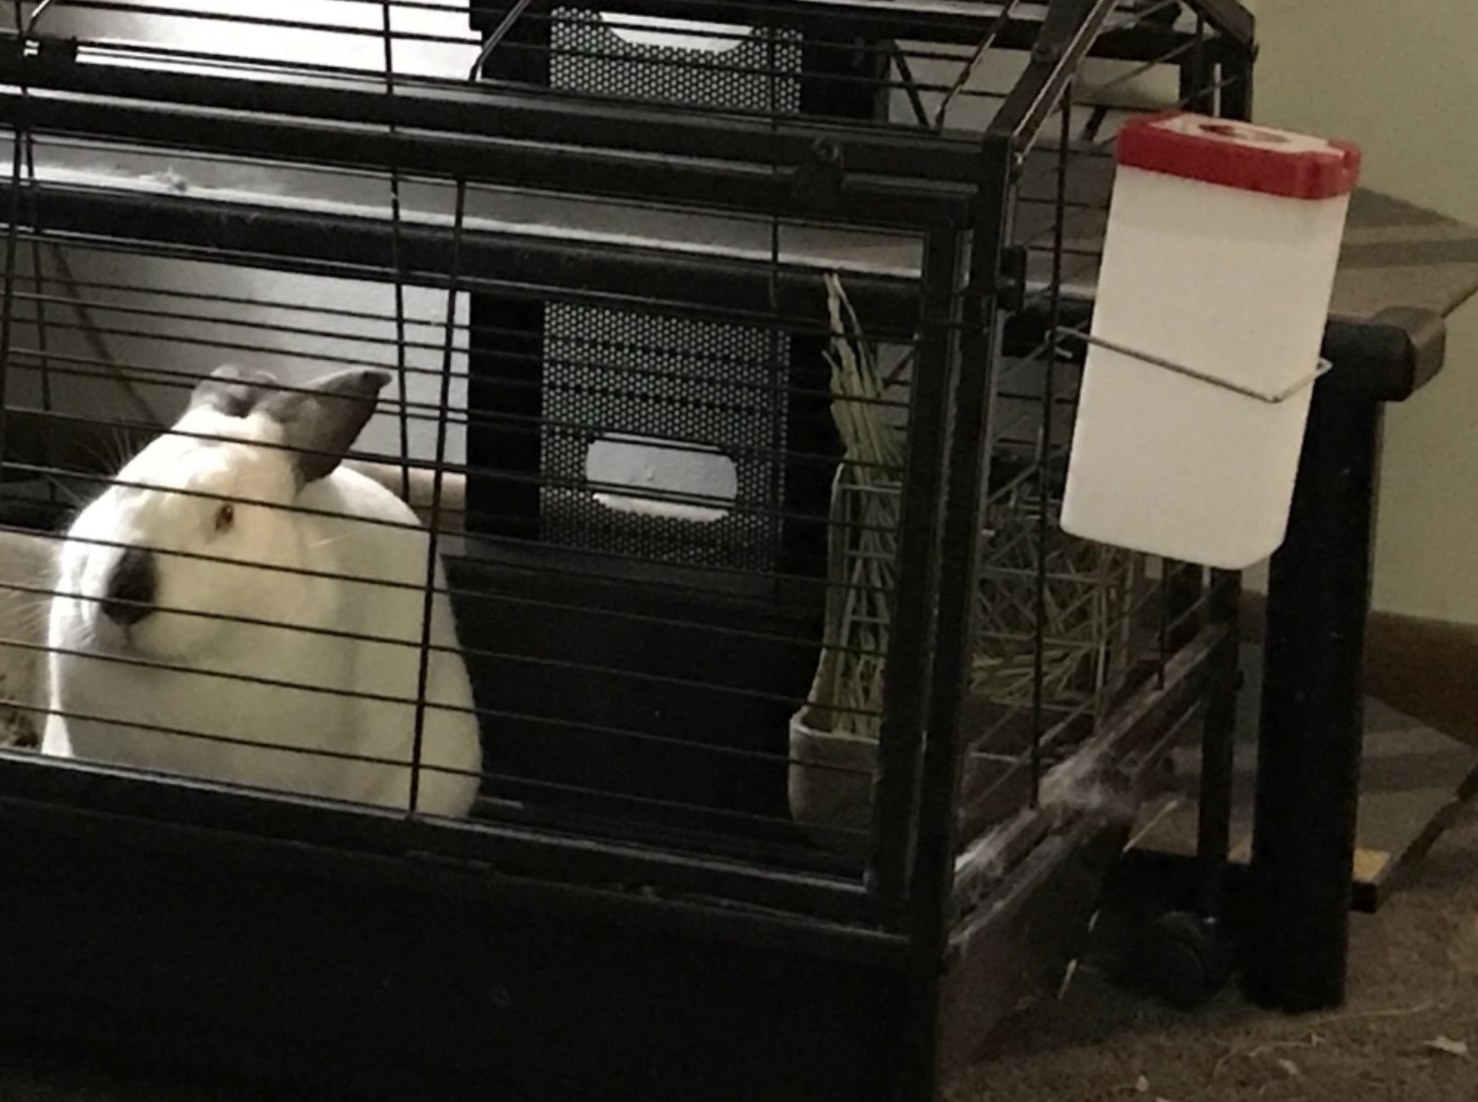 An image of a bunny in a cage with a plastic water bottle hung to the right of the cage